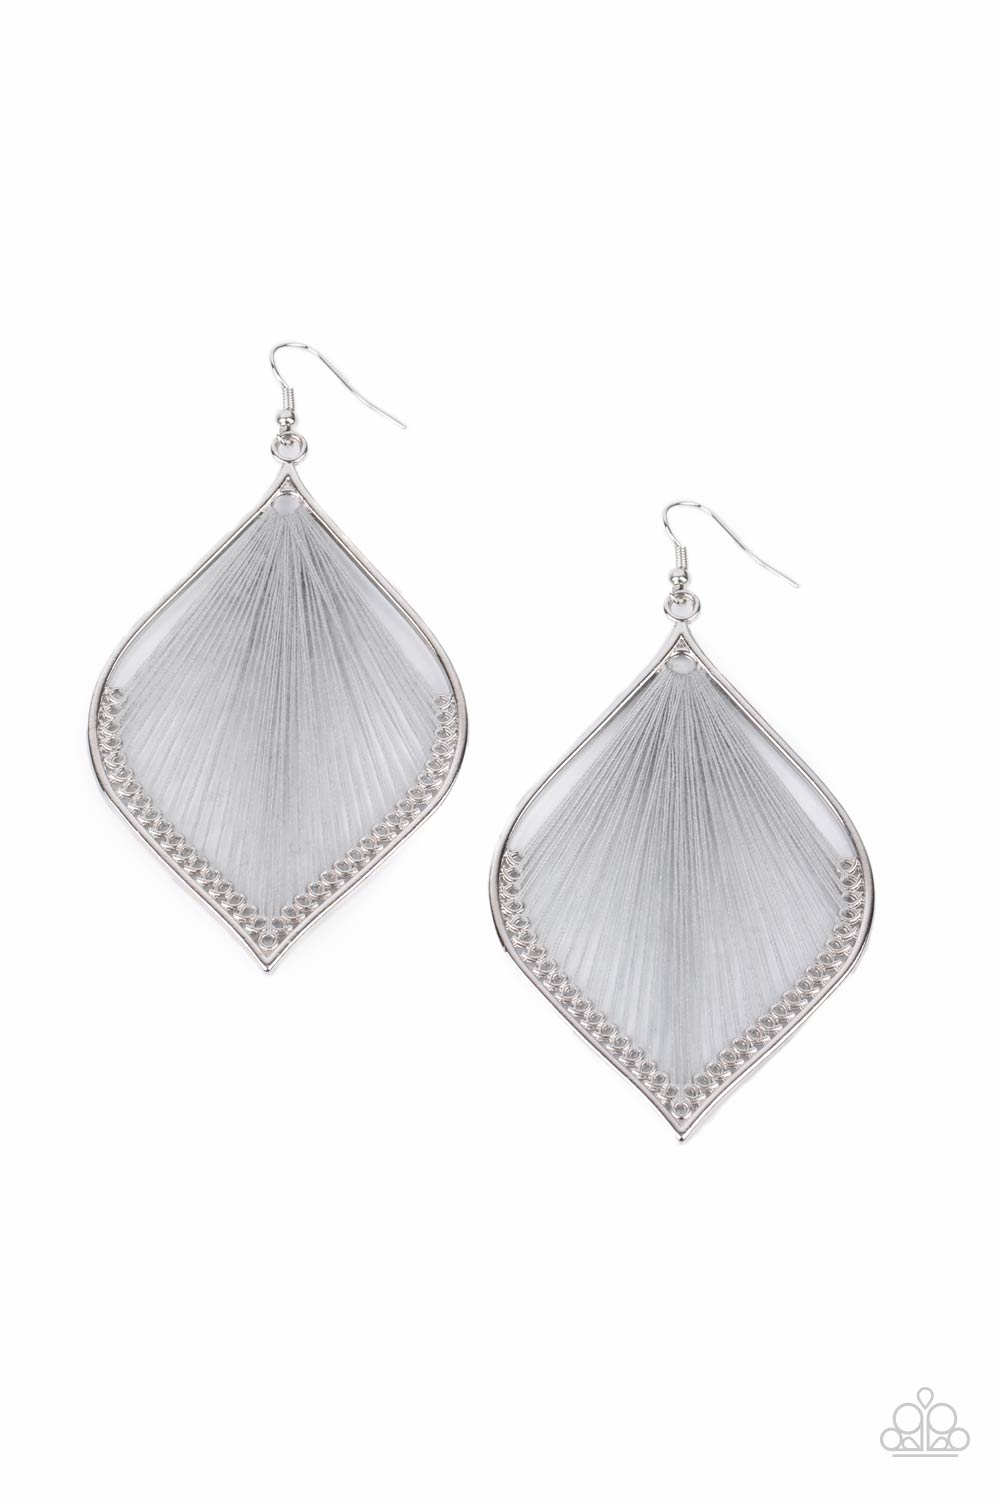 String Theory - Silver Earrings - Princess Glam Shop